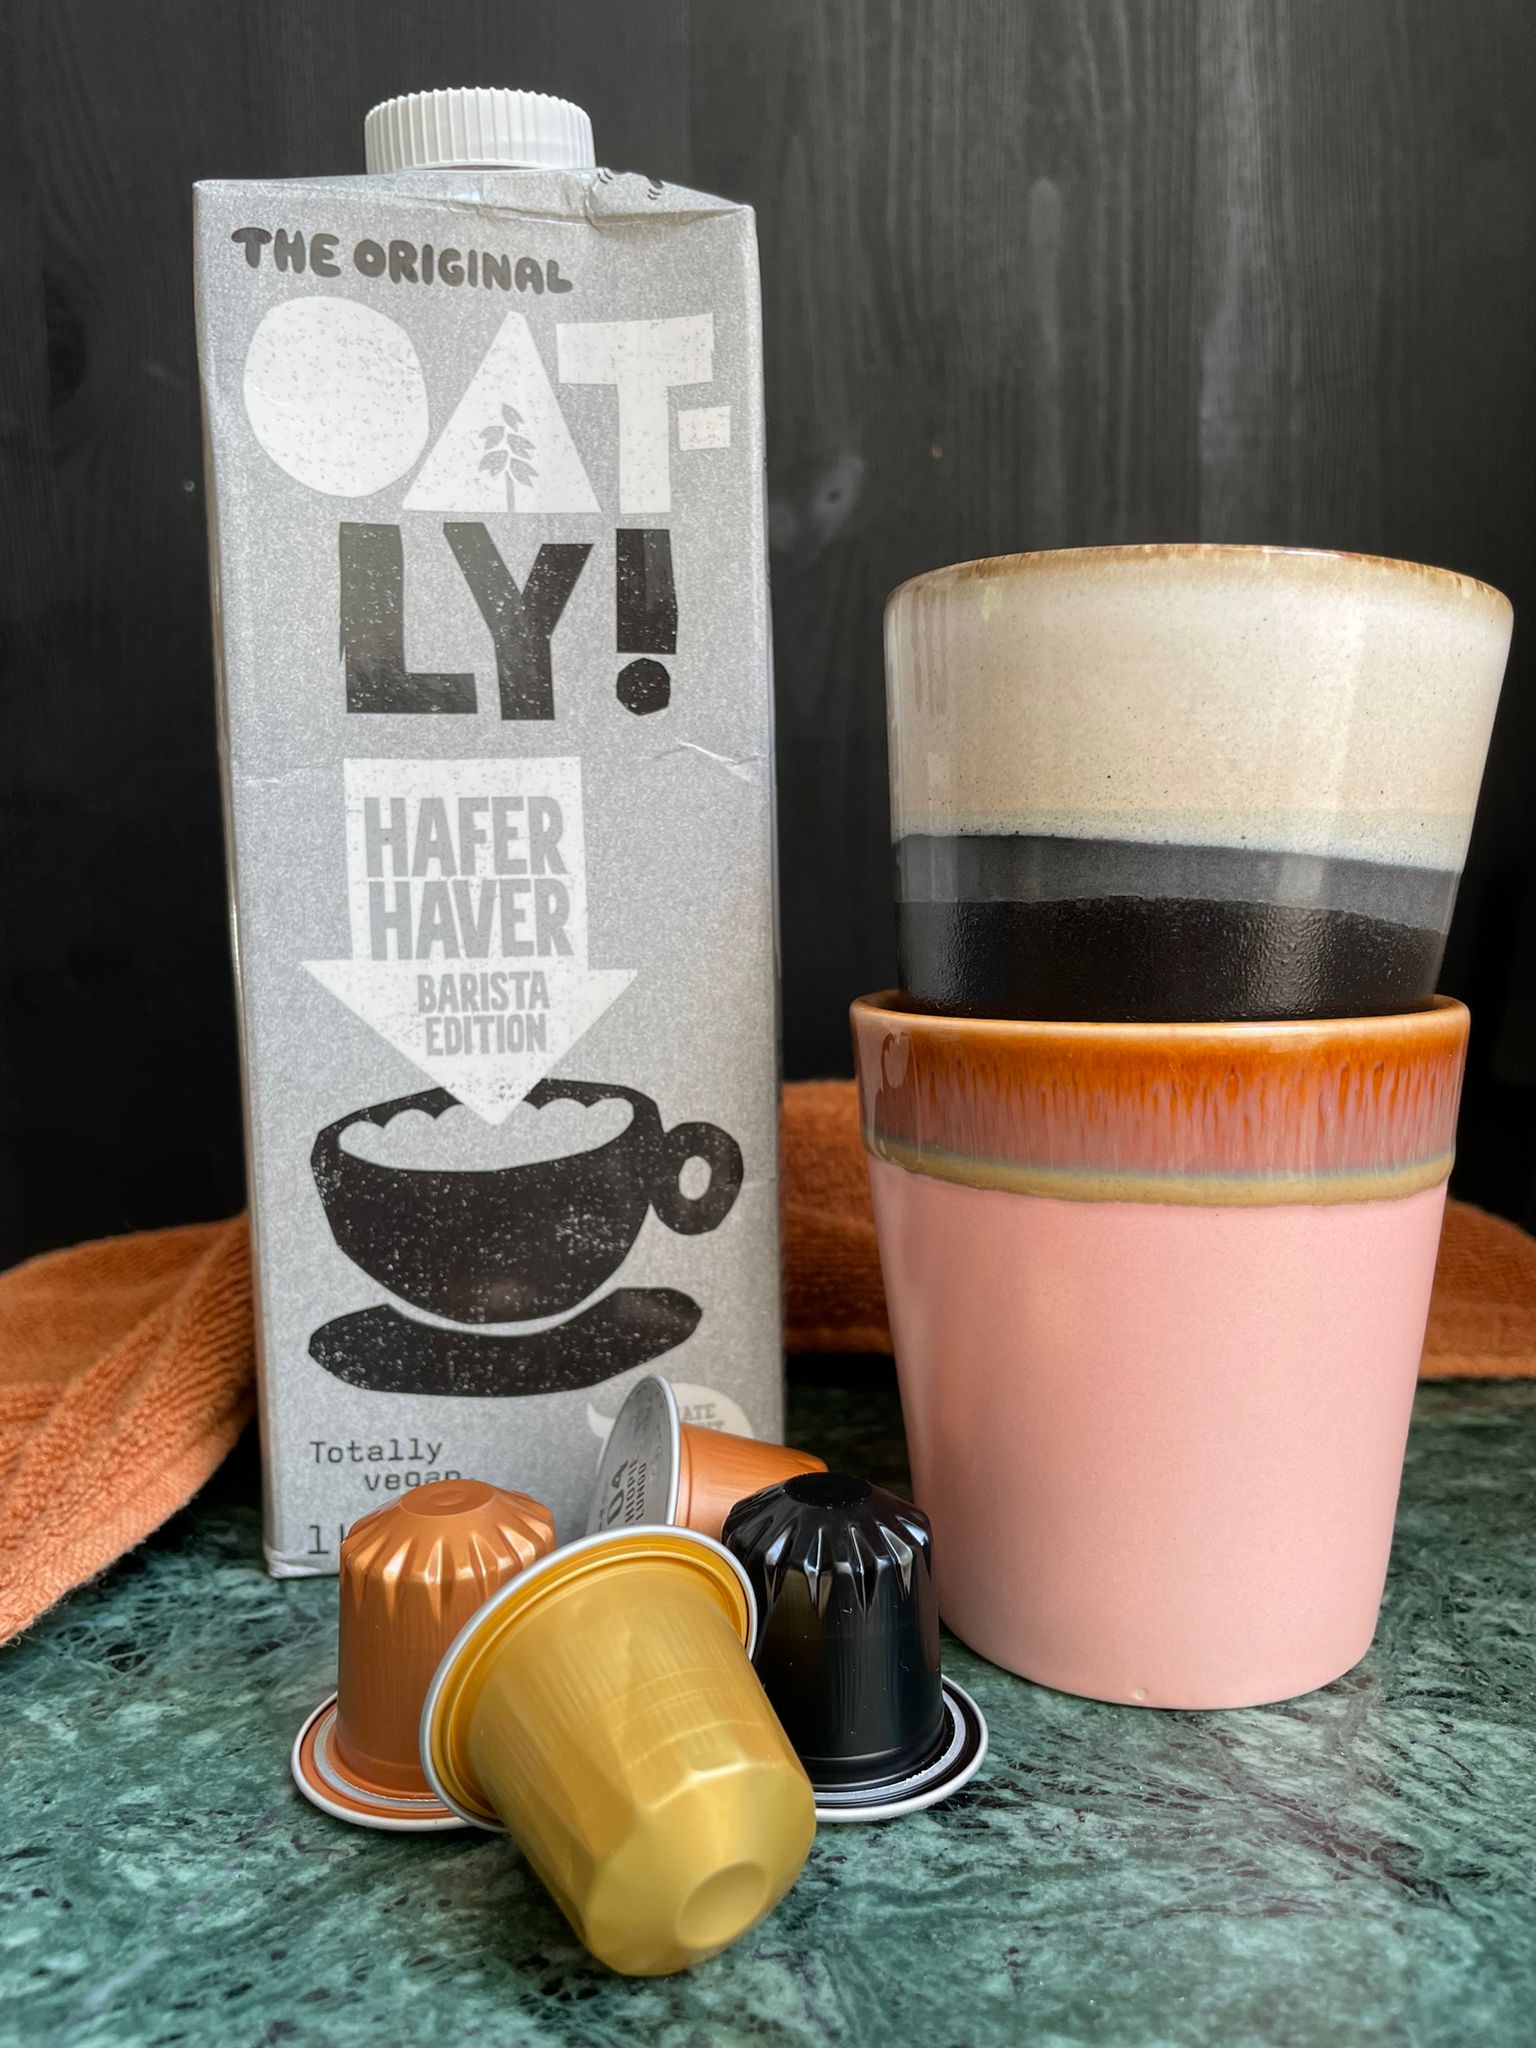 Oatly Have Barista